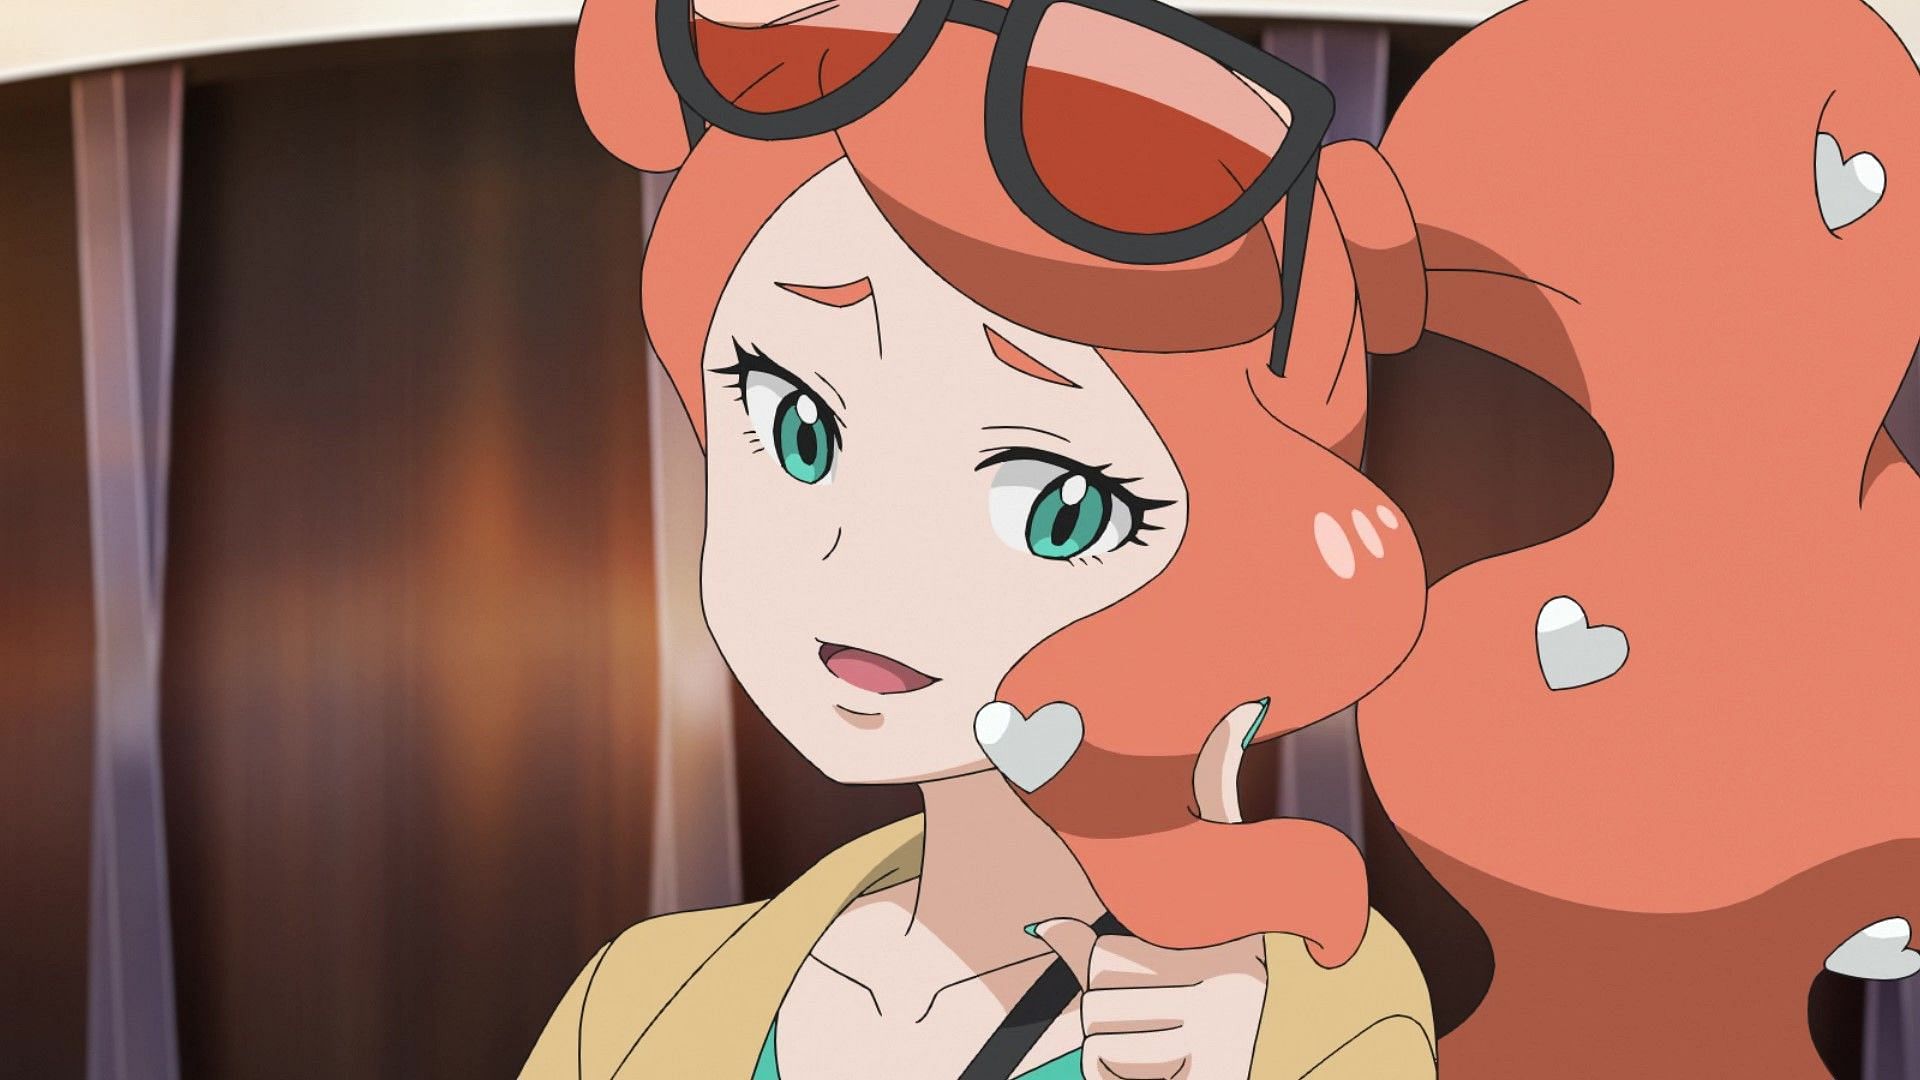 Sonia is studying Pokemon with style and beauty (Image credits: OLM Incorporated, Pokemon Journeys: The series)